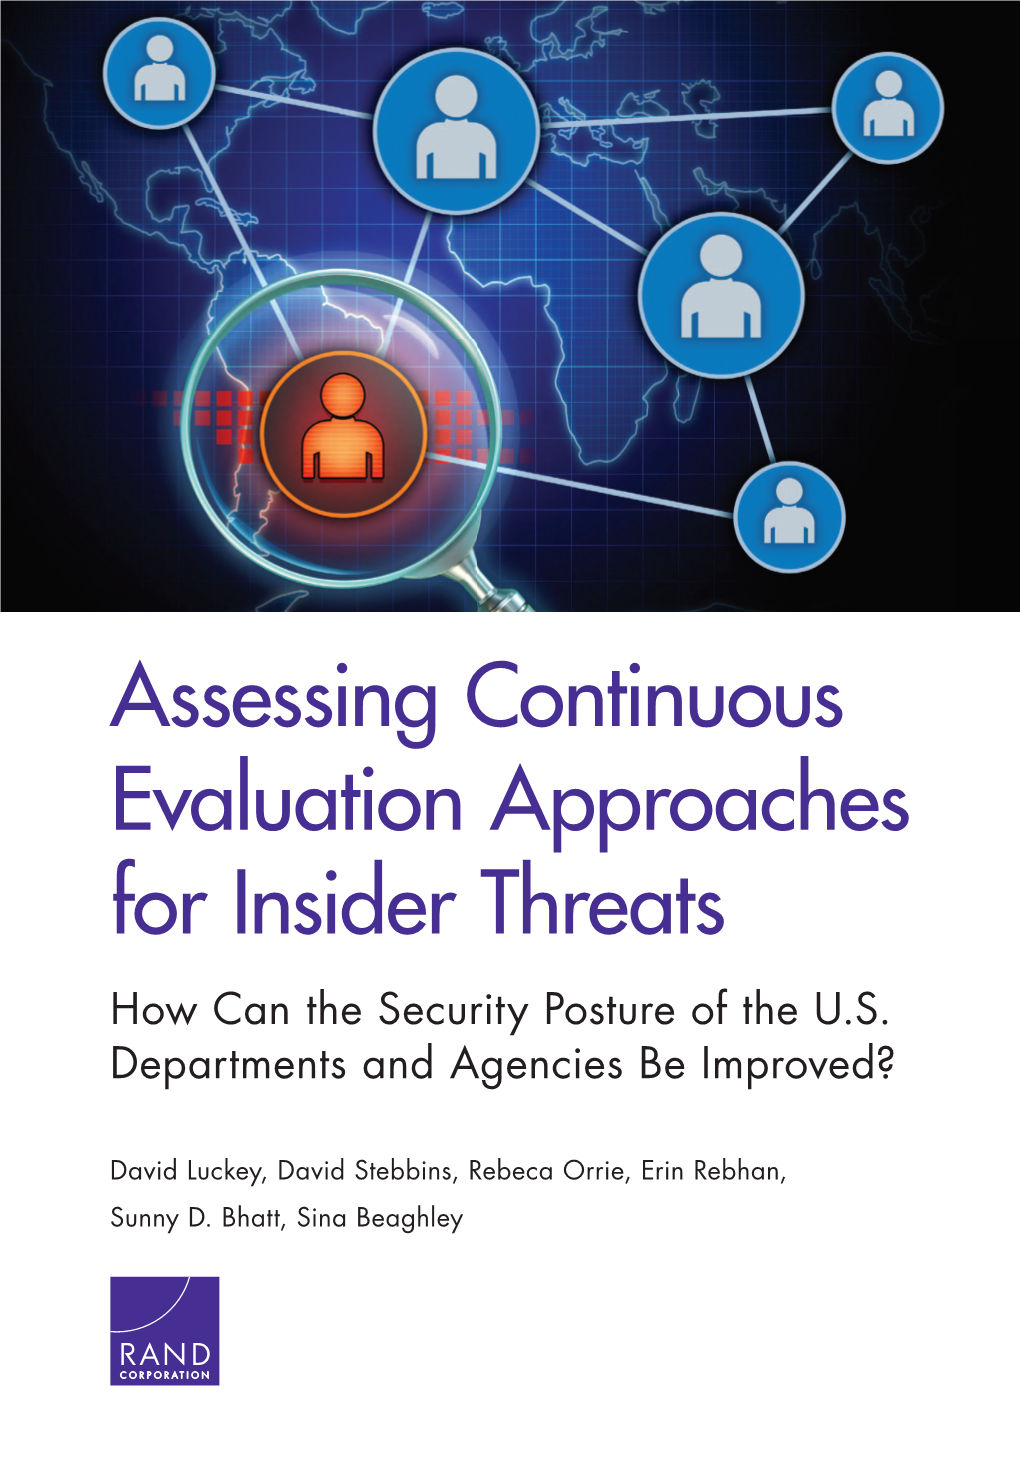 Assessing Continuous Evaluation Approaches for Insider Threats How Can the Security Posture of the U.S